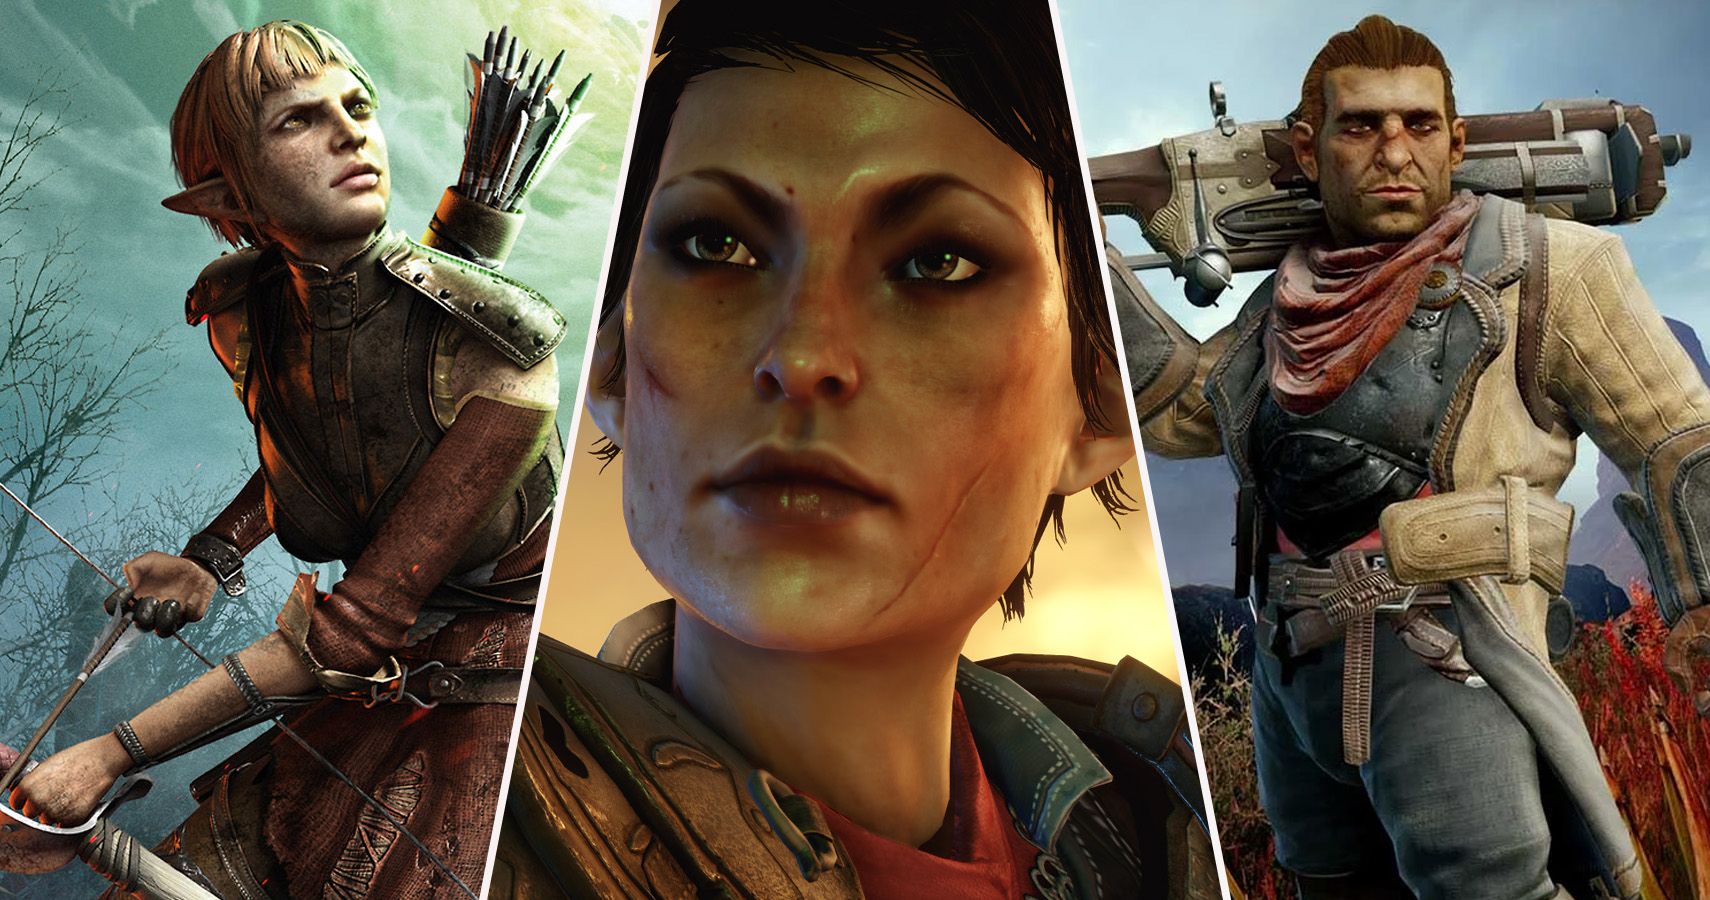 Dragon Age: Inquisition is 'Made for PC Gamers' - Hardcore Gamer